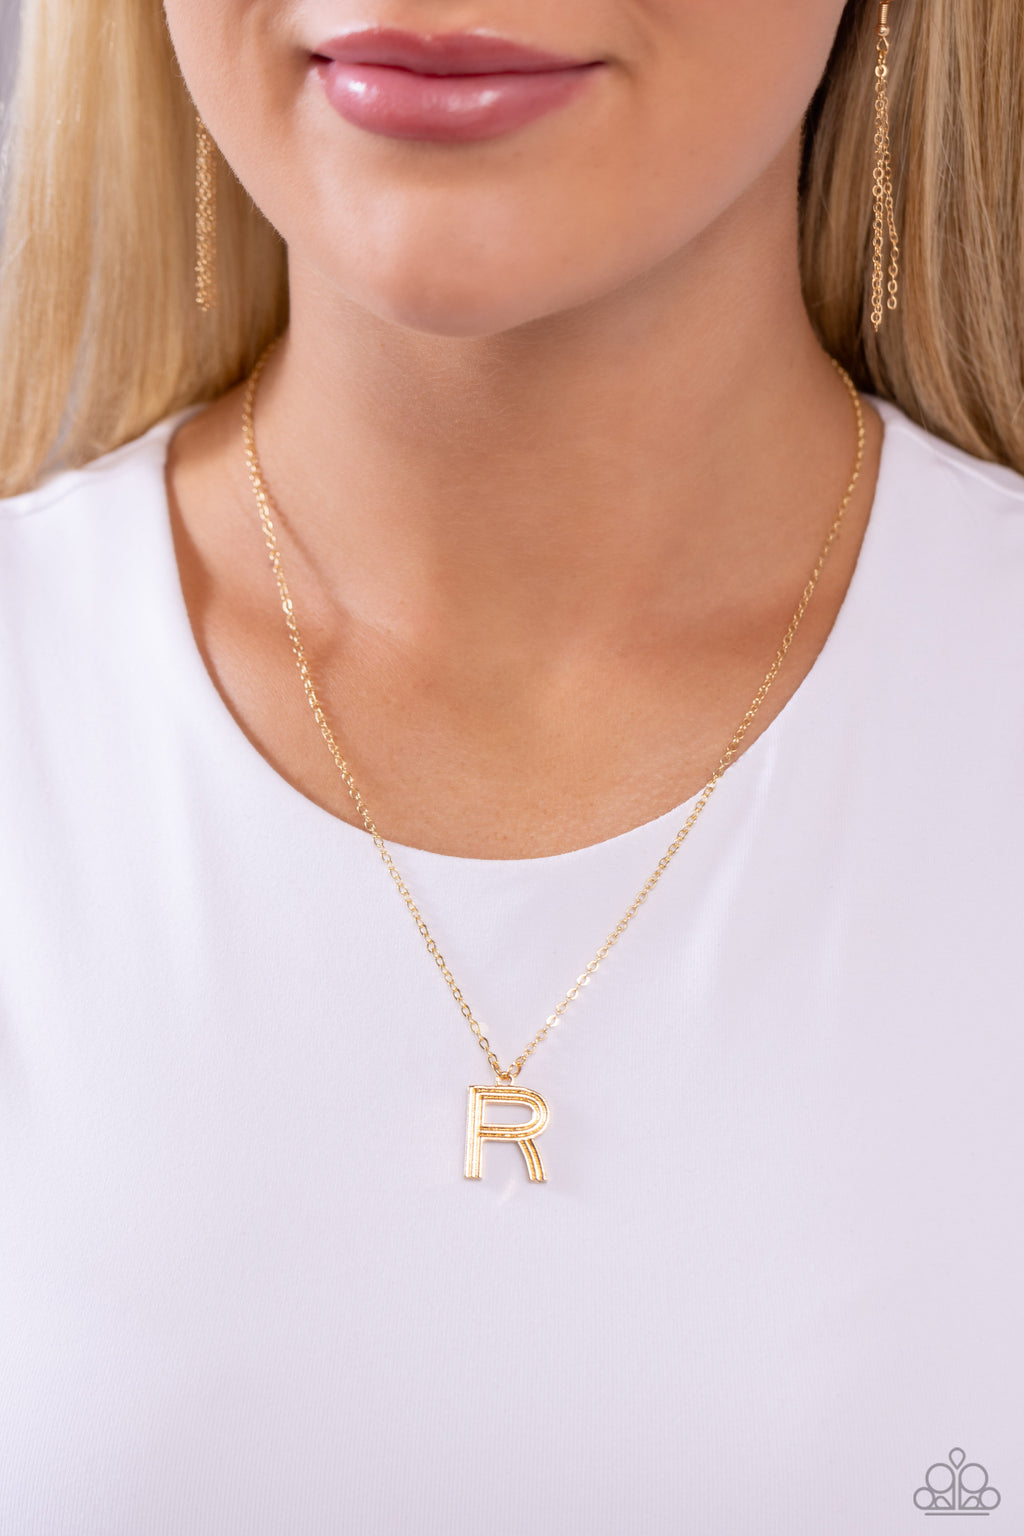 Paparazzi - Leave Your Initials - Gold - R Necklace